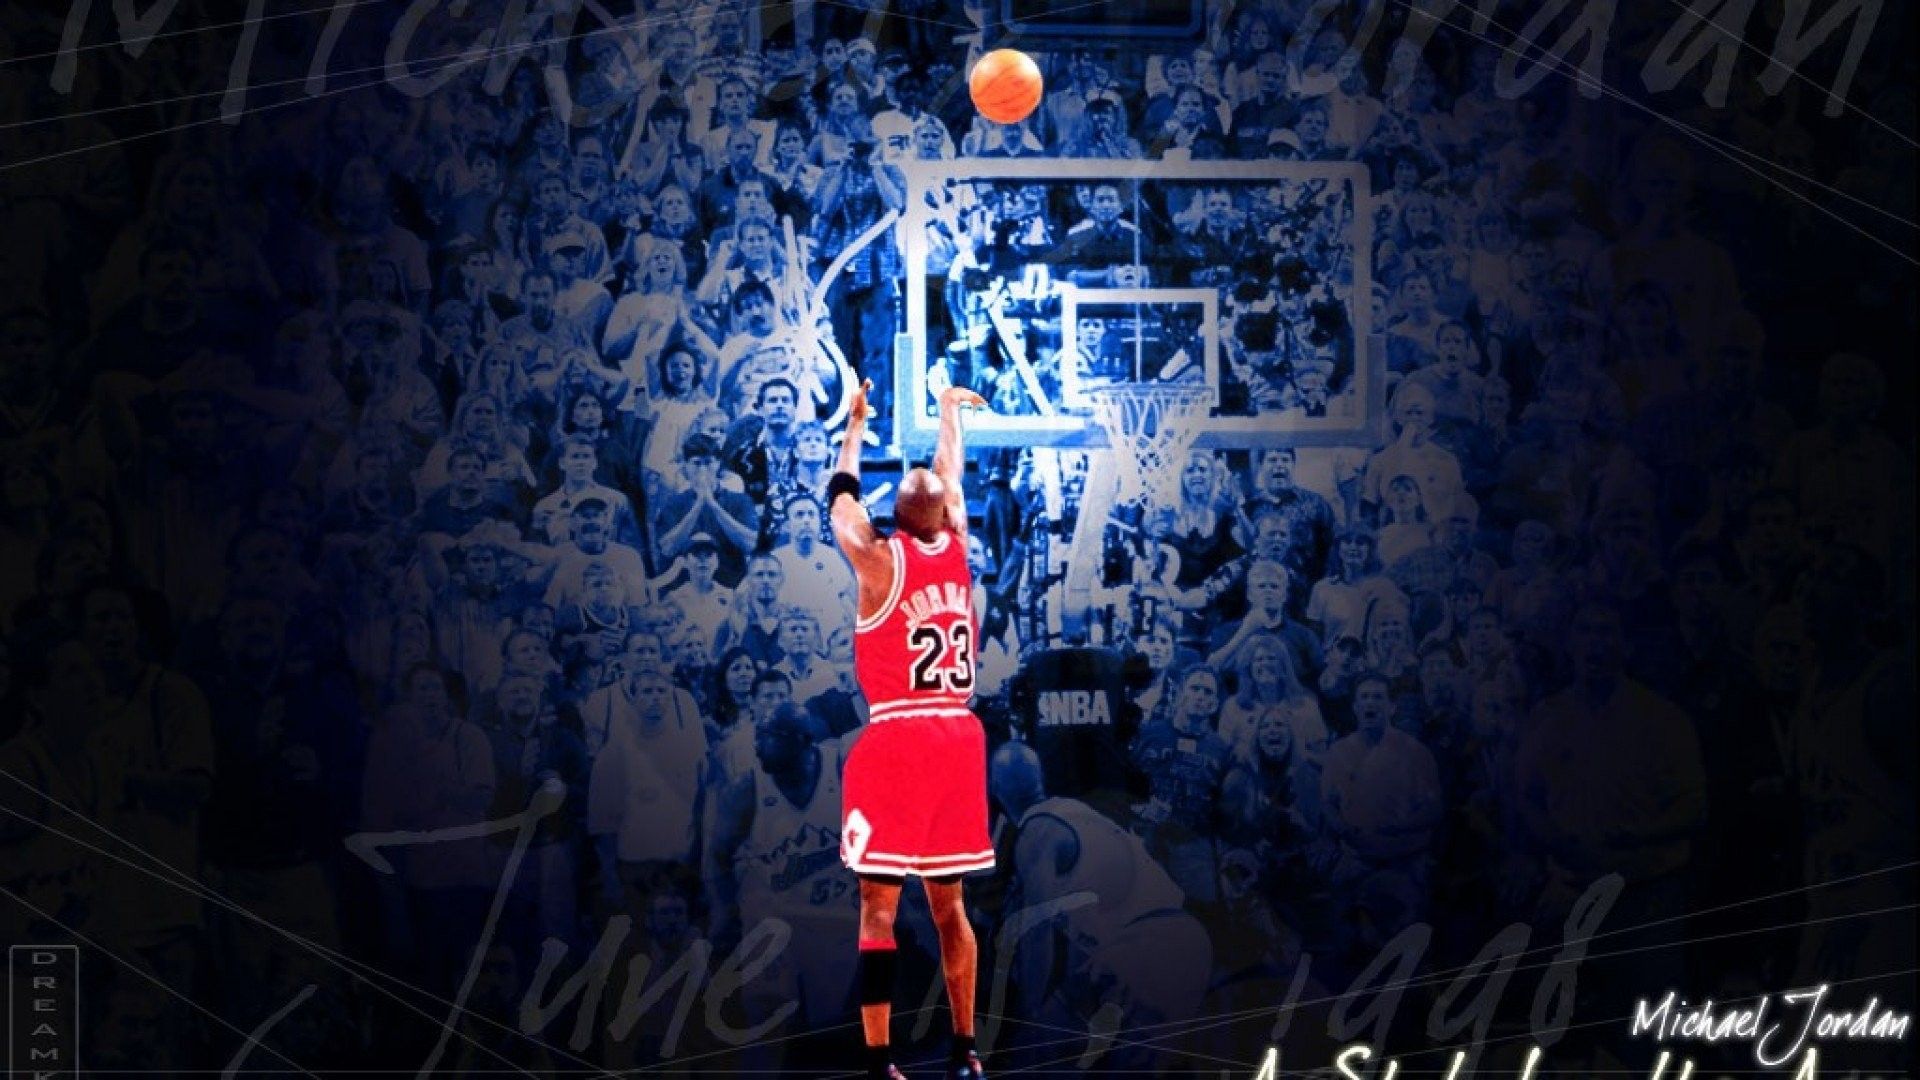 Michael Jordan Wallpaper Phone Cases for Samsung Galaxy for Sale  Redbubble